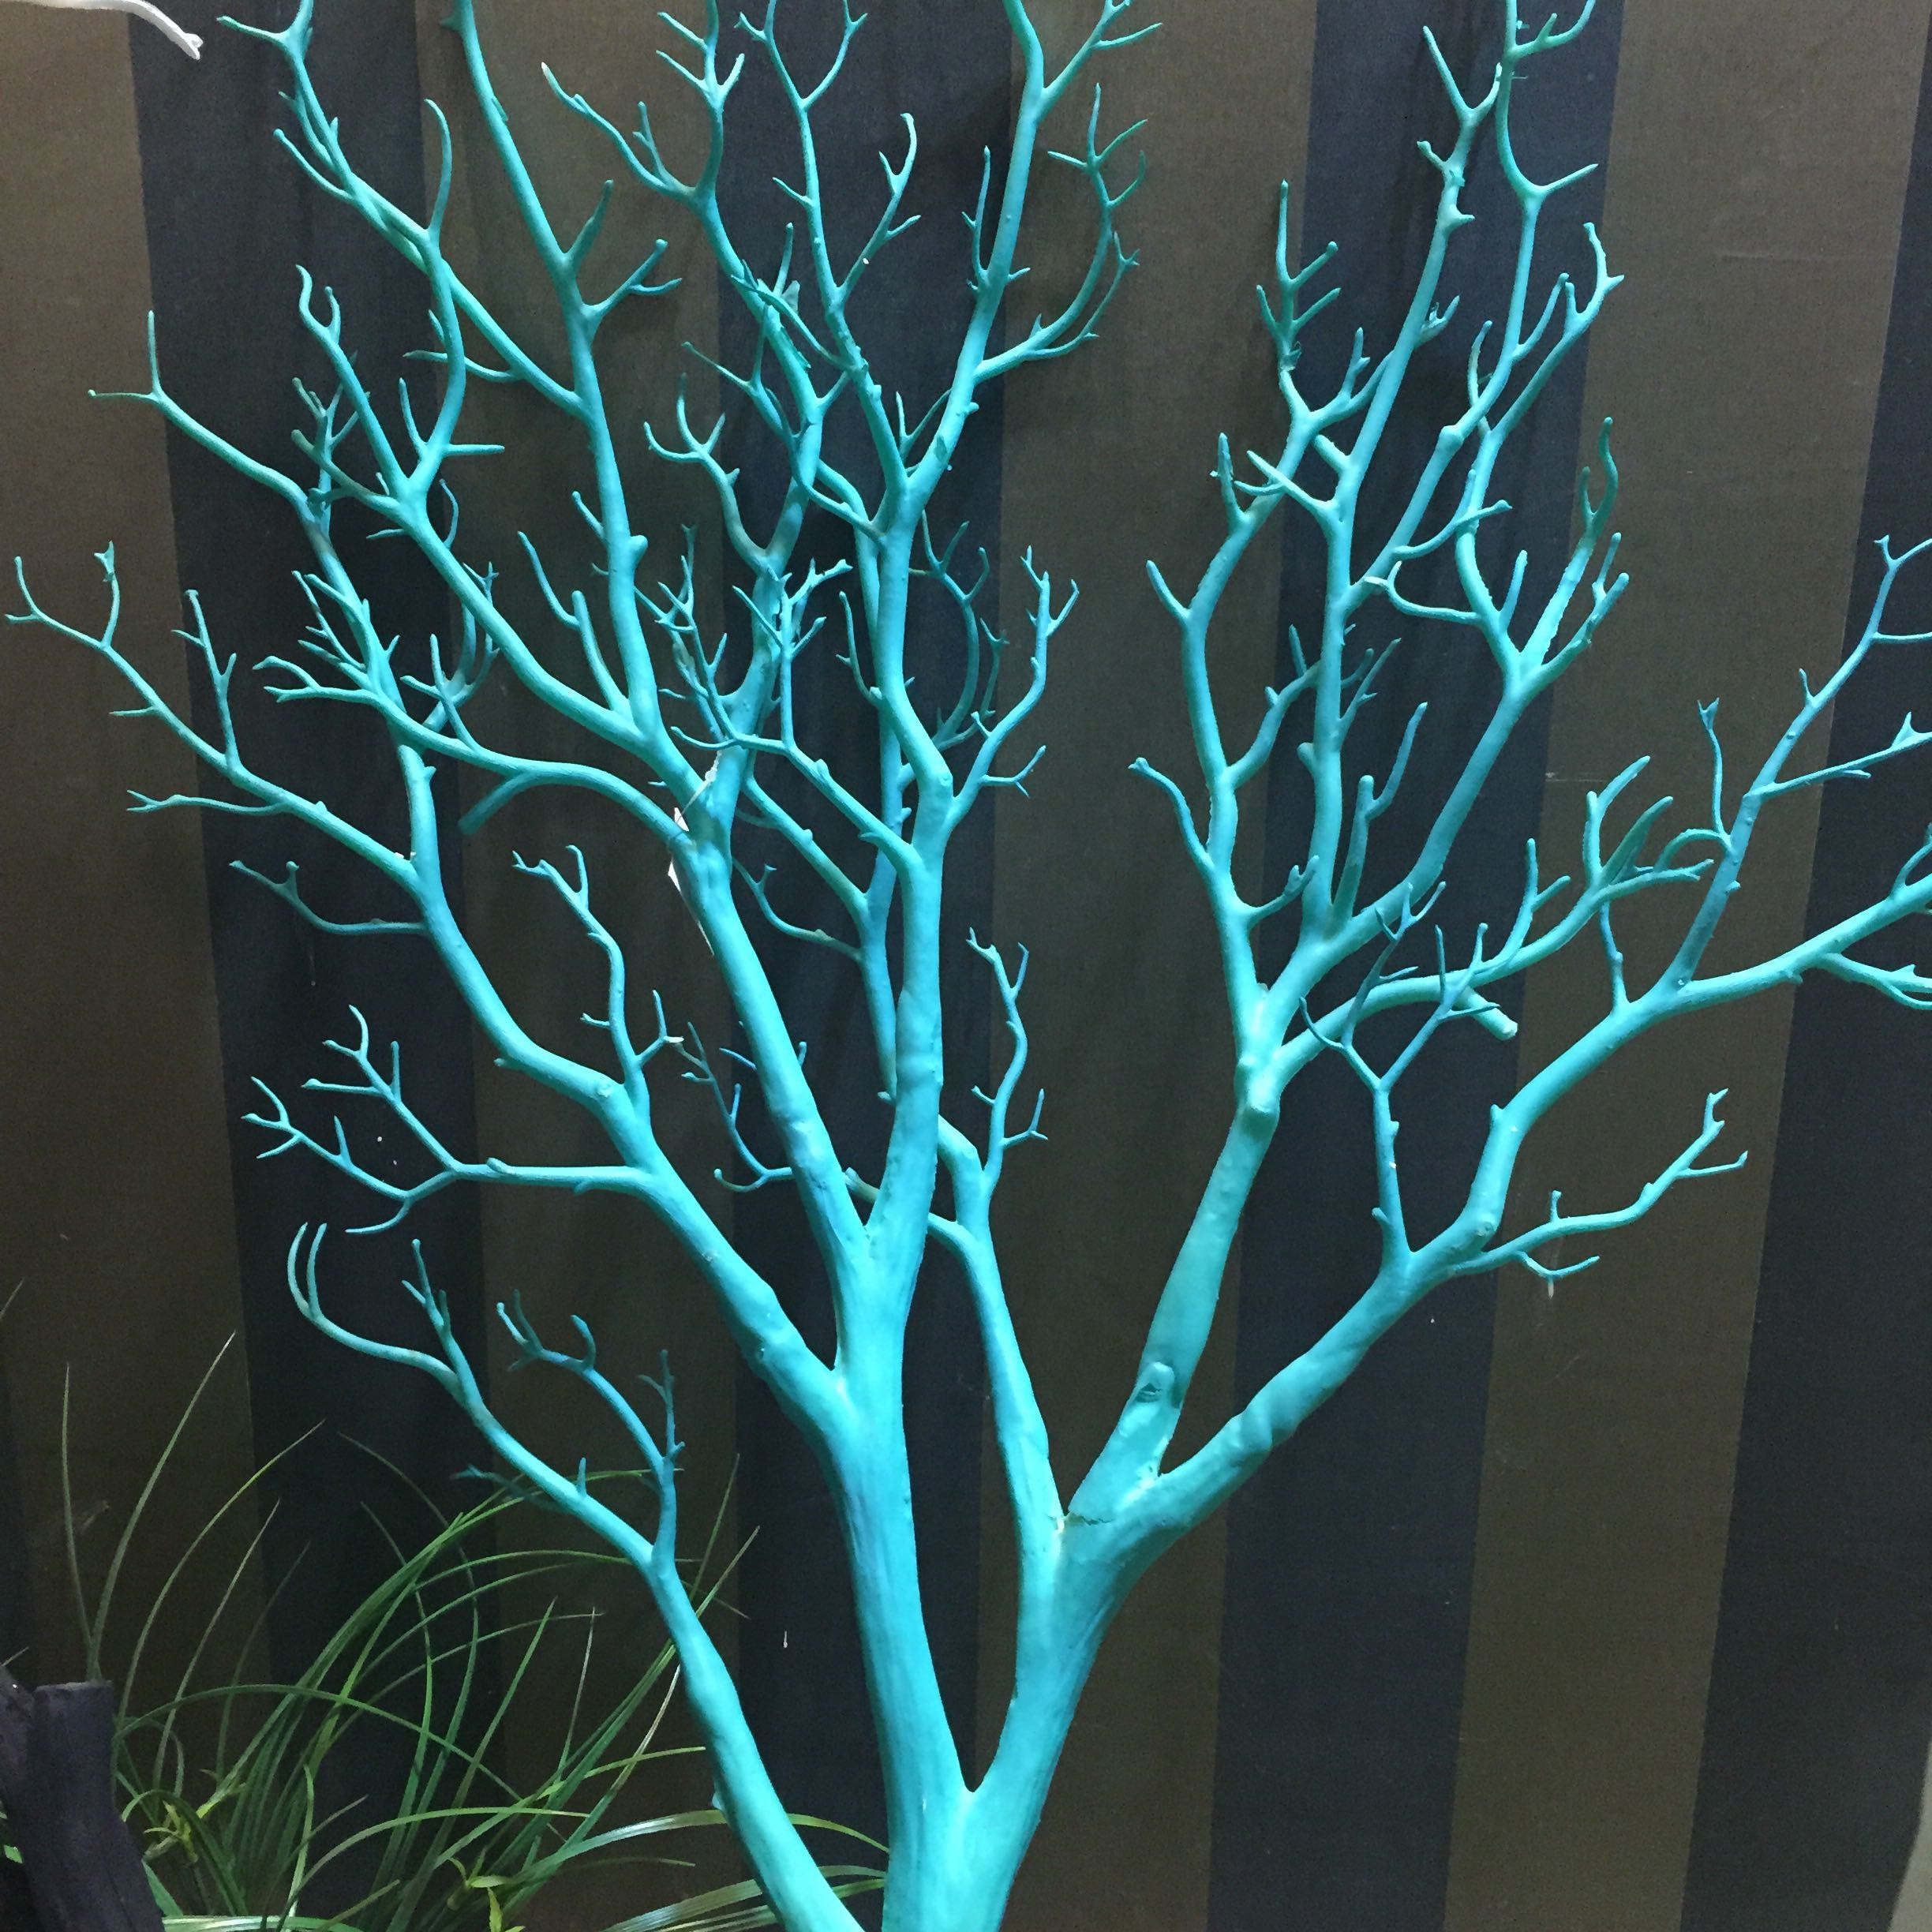 21 Best Blue Glass Vase 2024 free download blue glass vase of decorative branches for weddings awesome tall vase centerpiece ideas with regard to decorative branches for weddings beautiful wedding decoration peacock coral branch plas